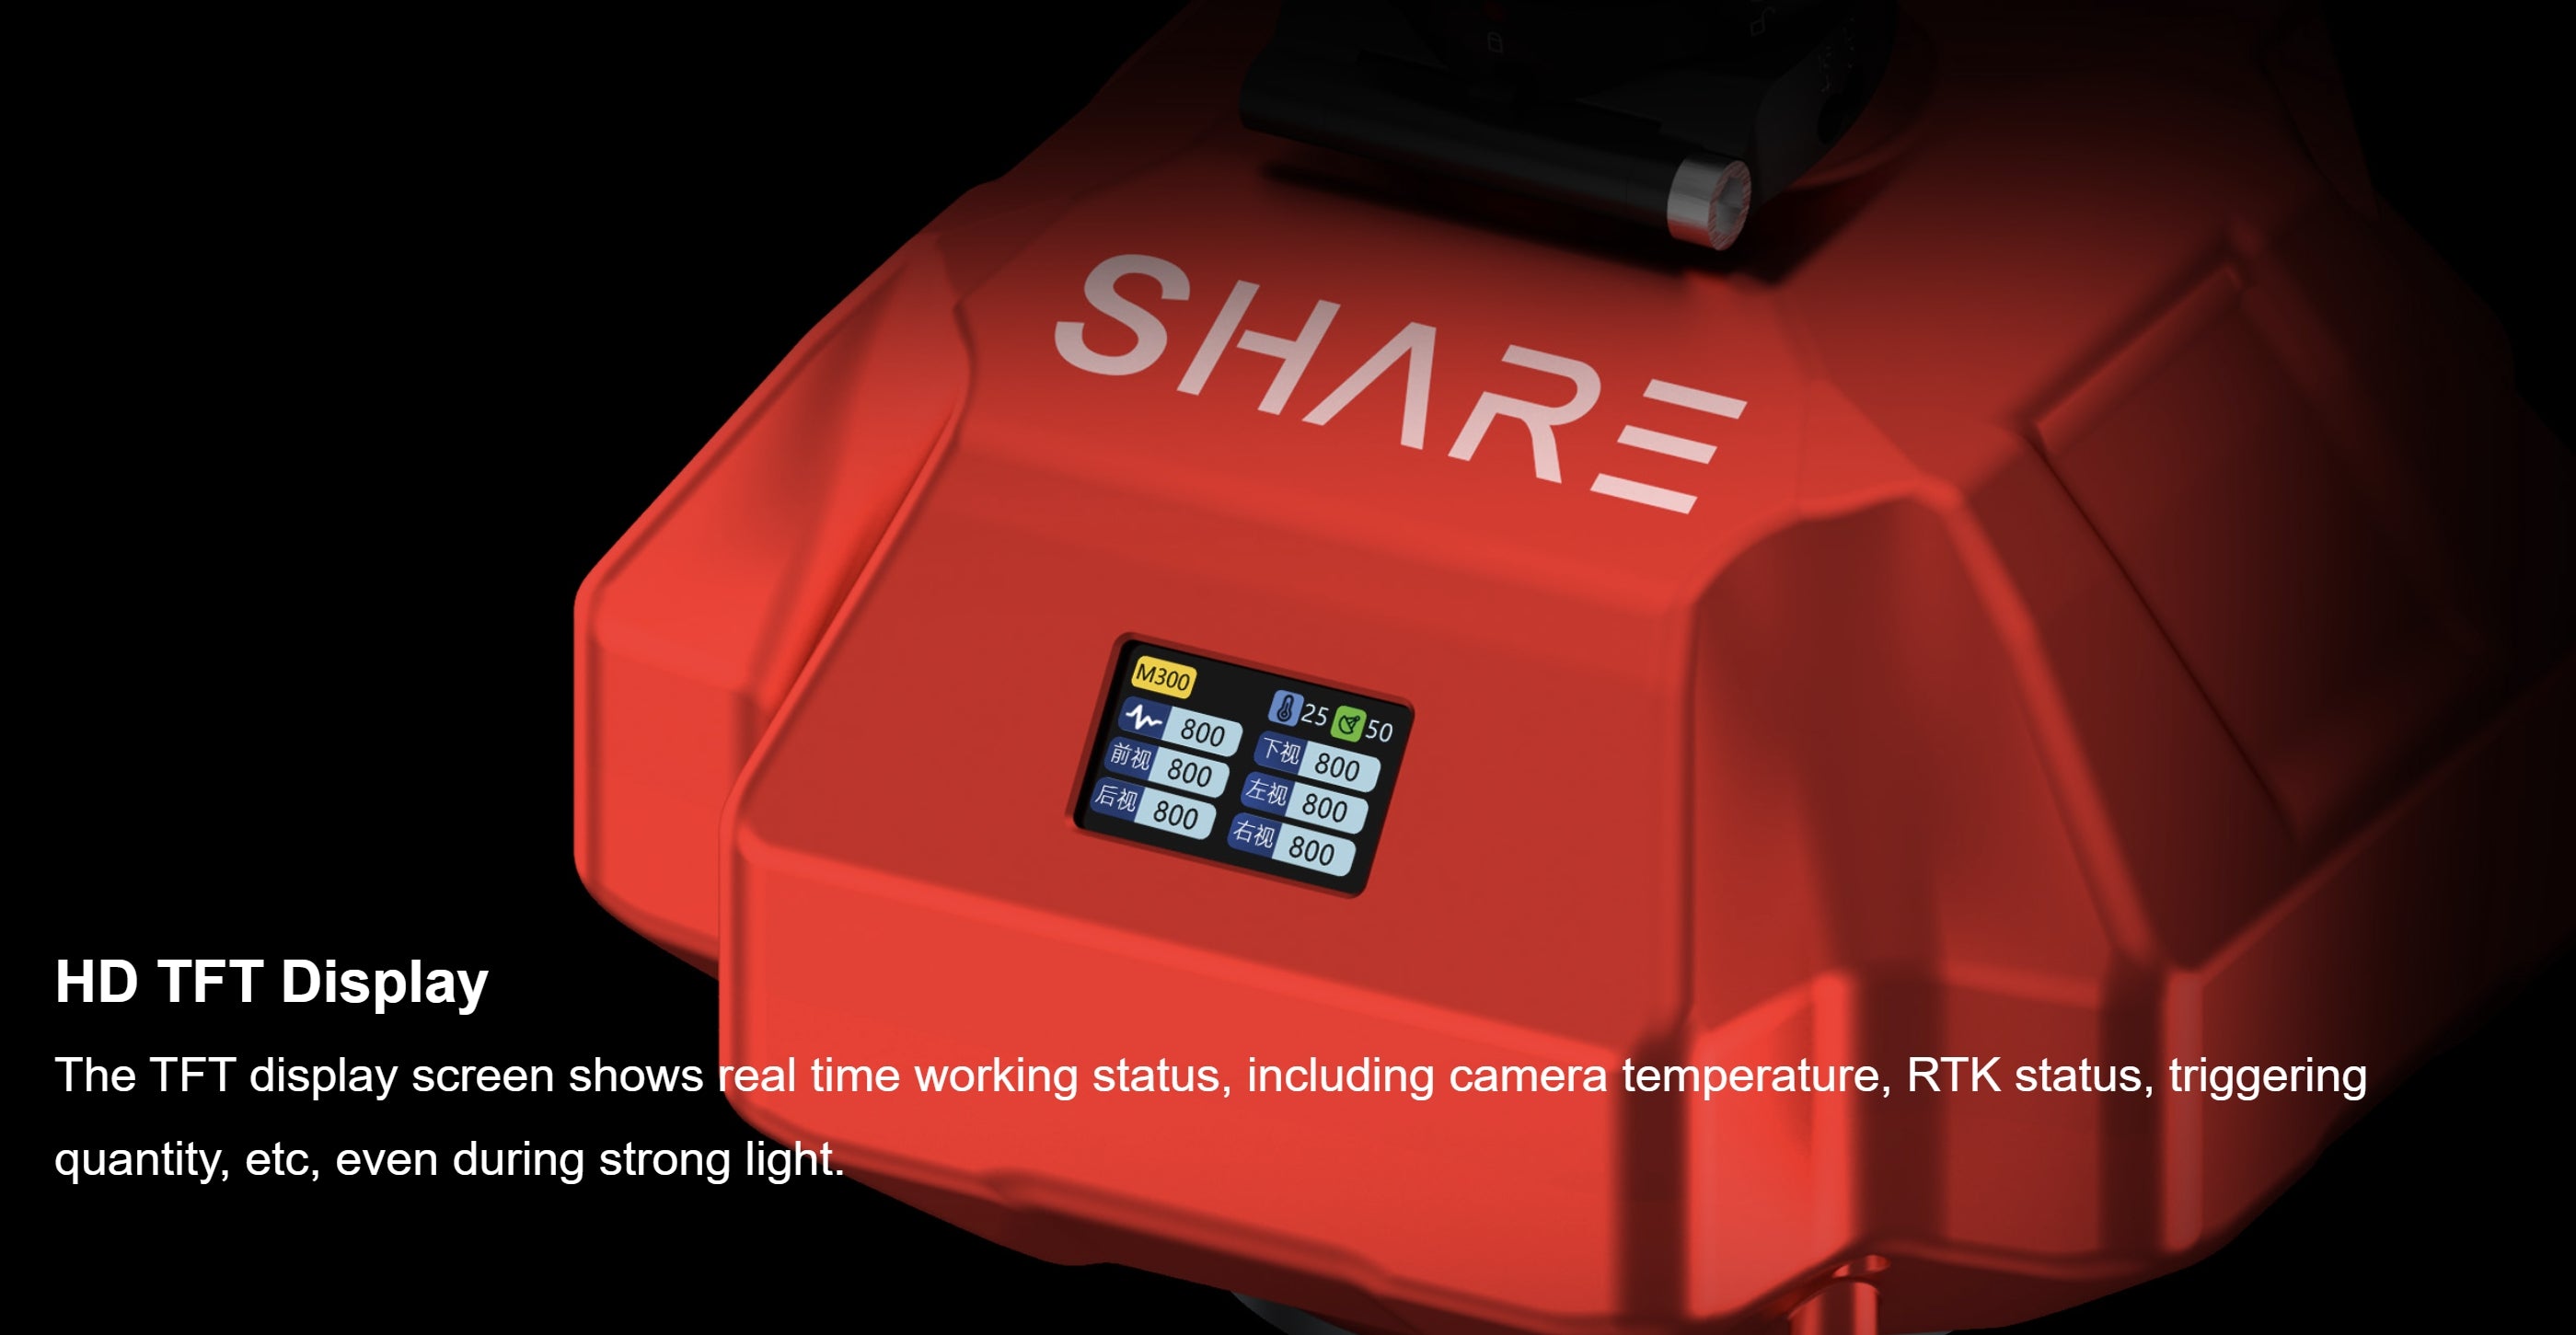 SHARE 102S Pro V2 aerial camera with HD display showing real-time status and reliable info in bright lights.